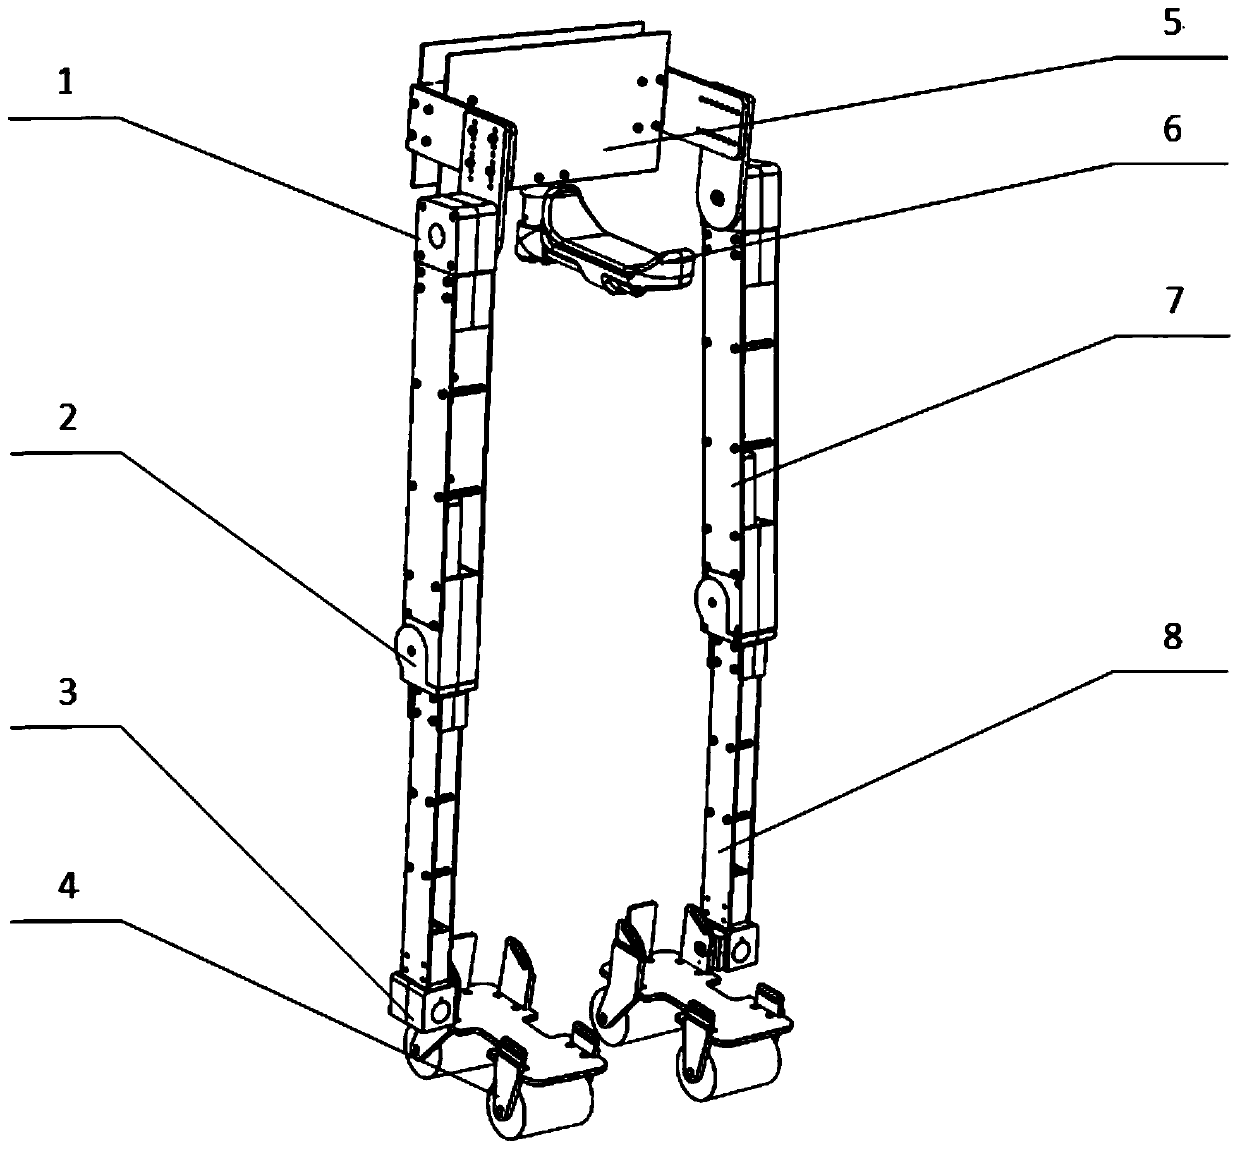 A plantar wheel-driven self-balancing powered exoskeleton for patients with spinal cord injuries